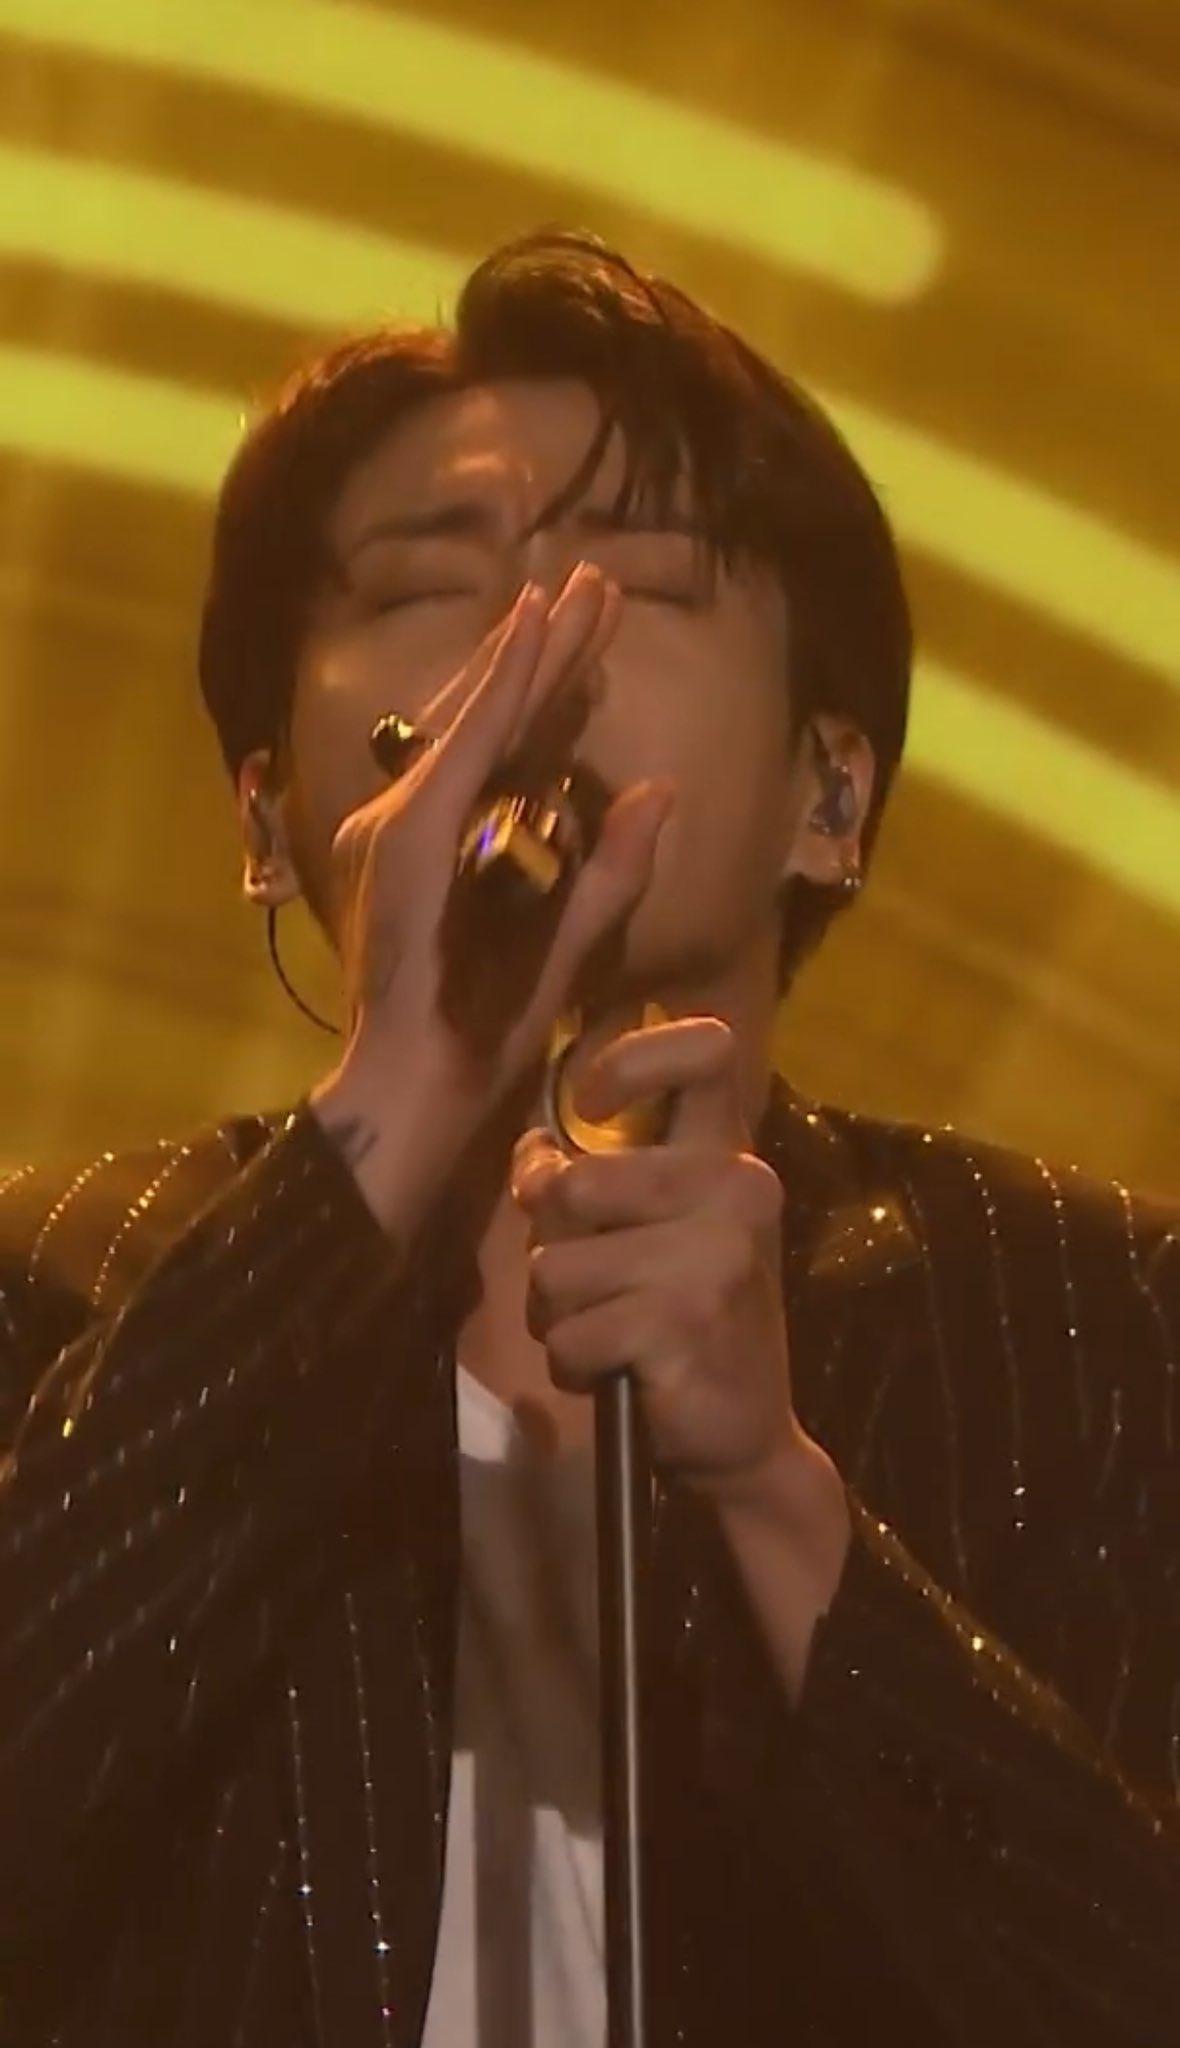 Jungkook even performed his latest hit song 'Standing Next To You' from his debut album 'Golden'